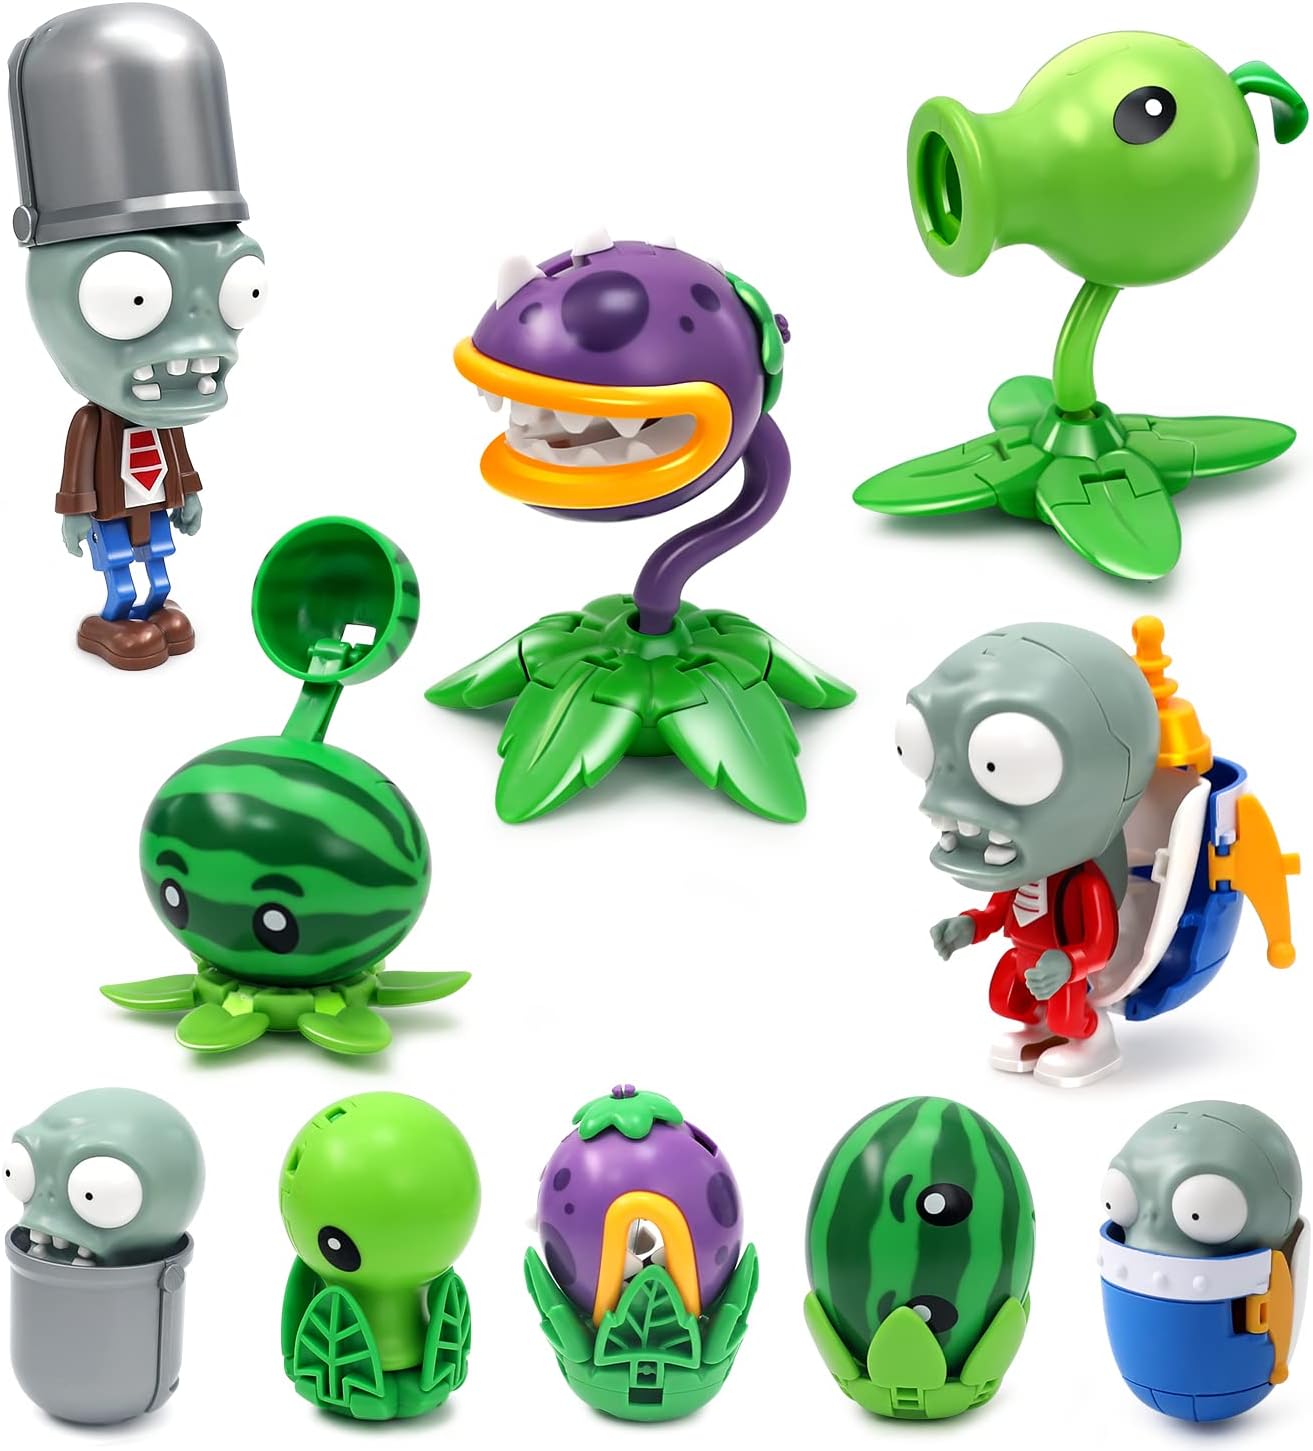 Maikerry Plants and Zombies Toys vs Egg Transformation Series Assembled Toys Action Figures Set Gift Game Fan Party Birthday Gifts Zombie PVZ Toys Figurines for Boys Girls